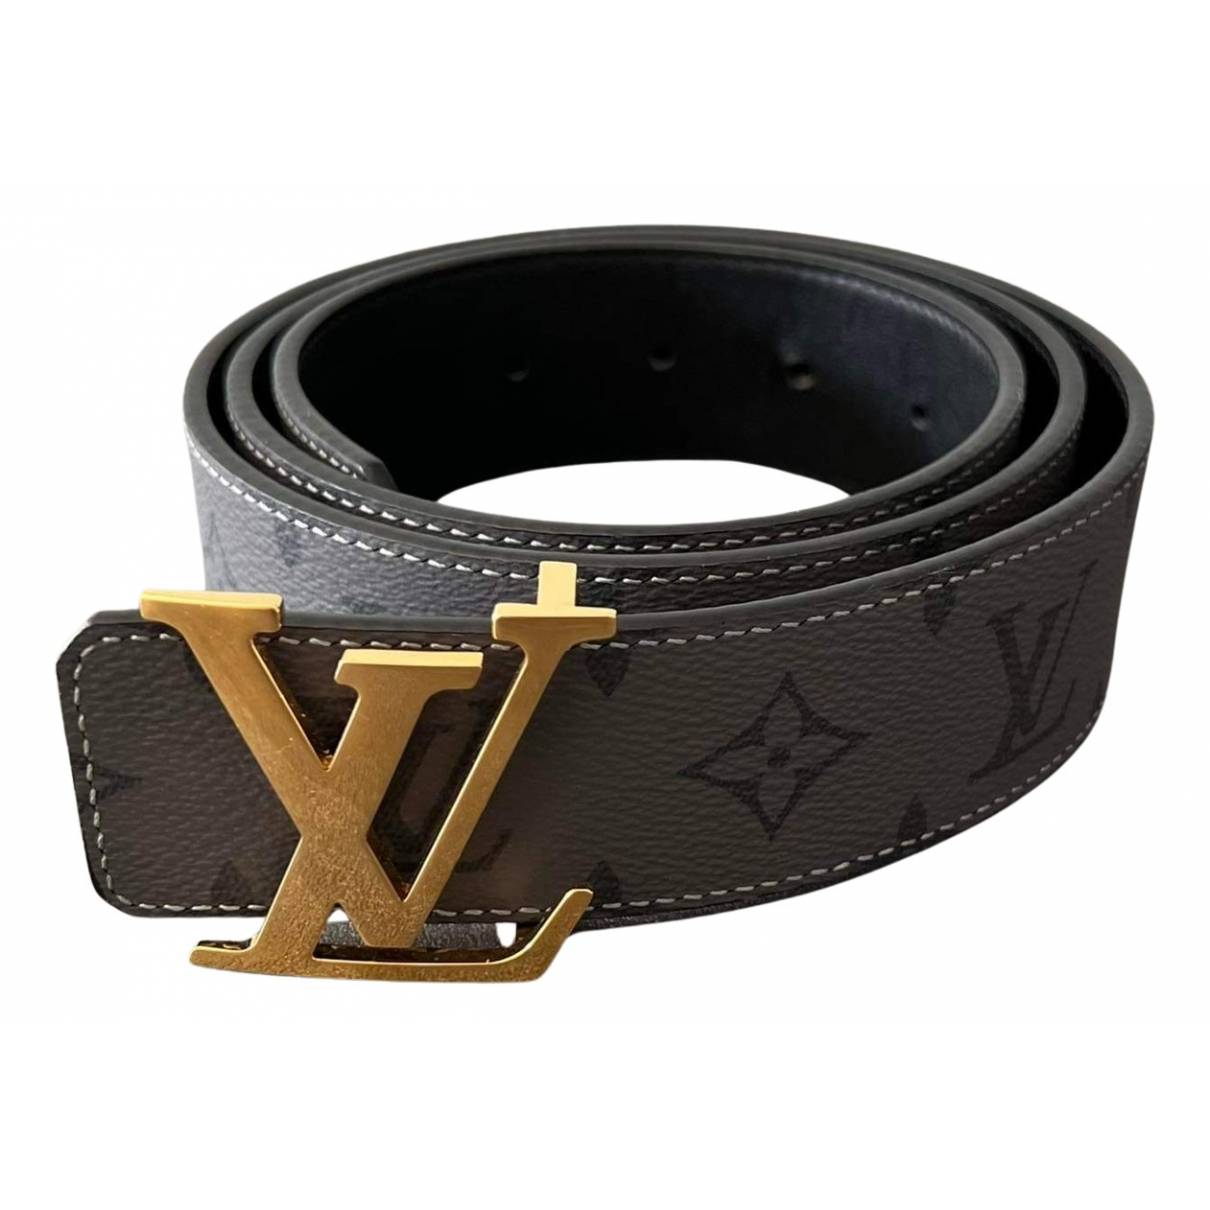 Initiales Leather Belt, 42% OFF